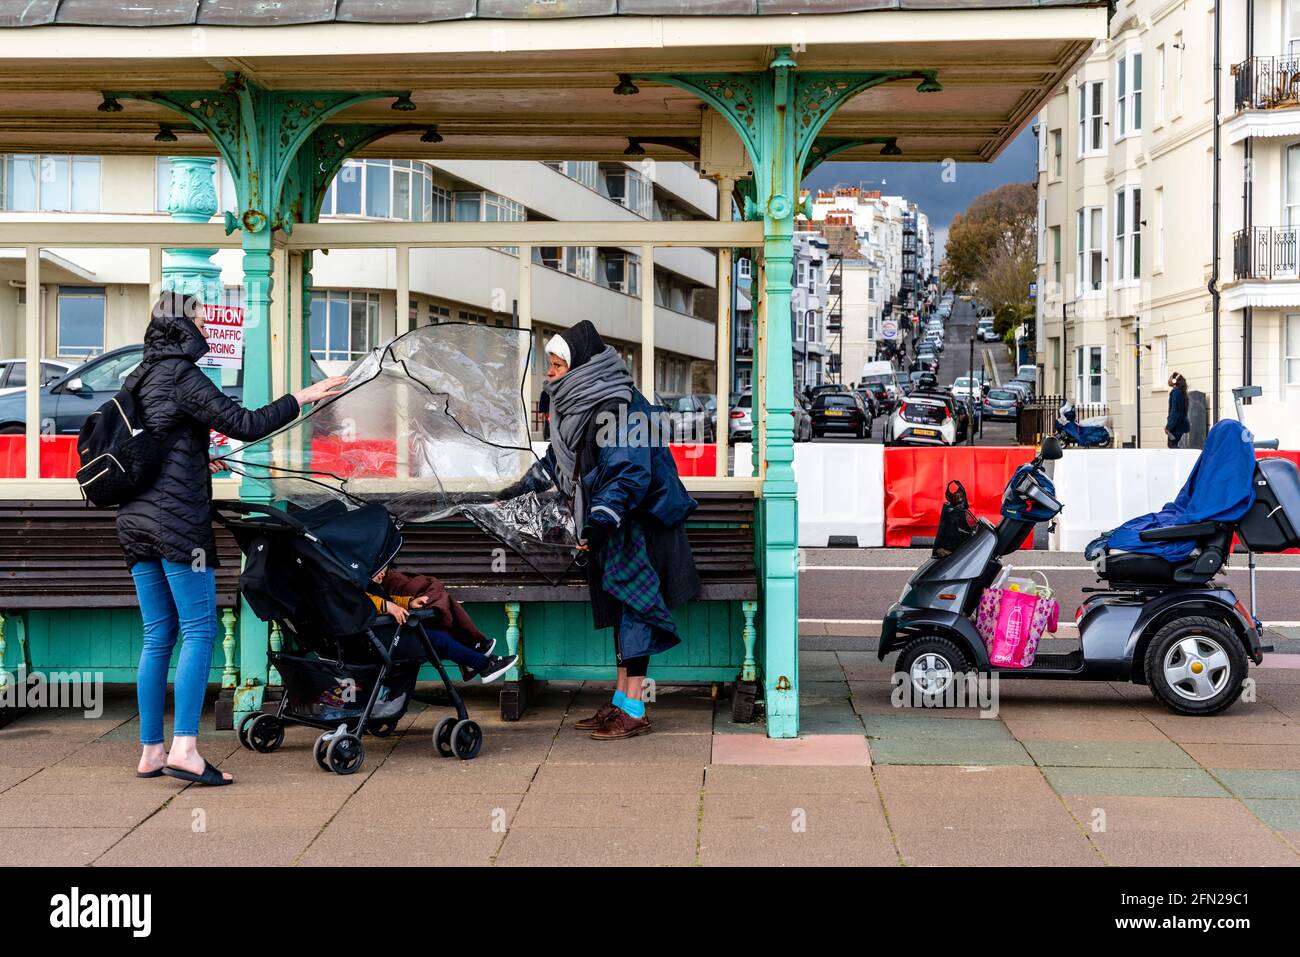 A Woman On A Mobility Scooter Stops To Help A Young Mother Put A Rain Cover Over A Baby In A Pushchair, Brighton, Sussex, UK. Stock Photo